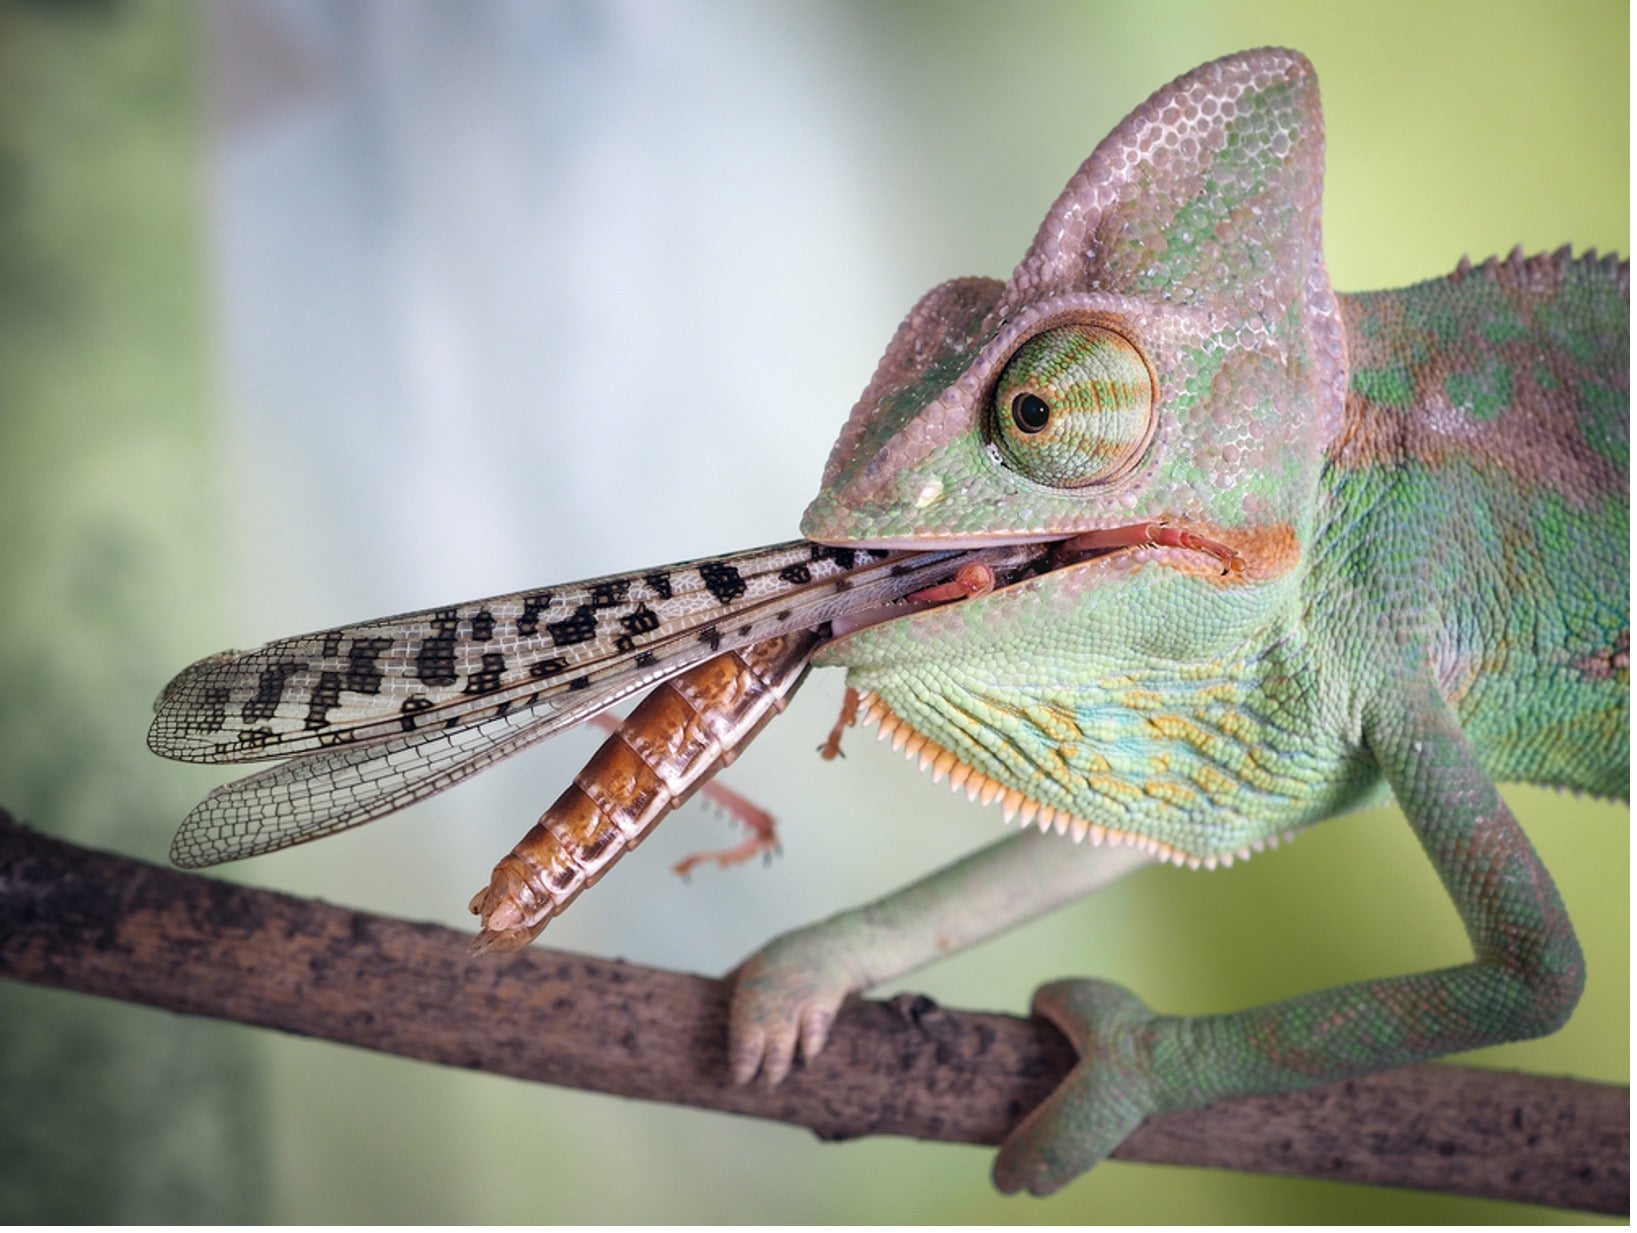 Crickets, Roaches & Worms: Oh My! Why a Varied Diet is Essential for Reptiles